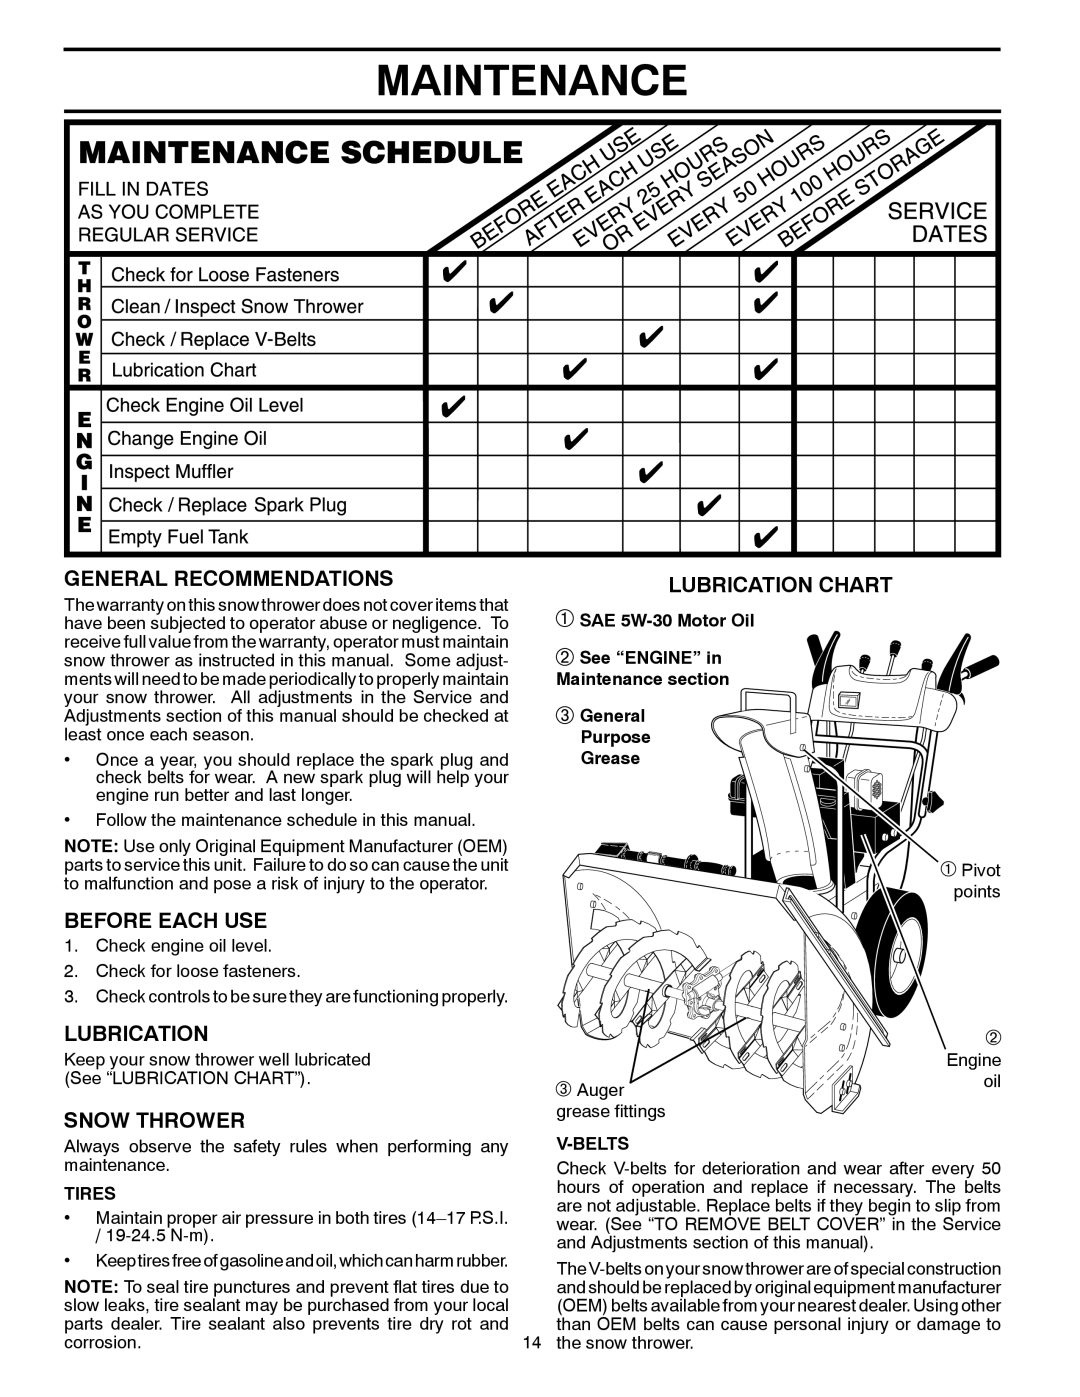 Poulan 420925 Maintenance, General Recommendations, Before Each Use, Snow Thrower, Lubrication Chart, Tires, V-Belts 